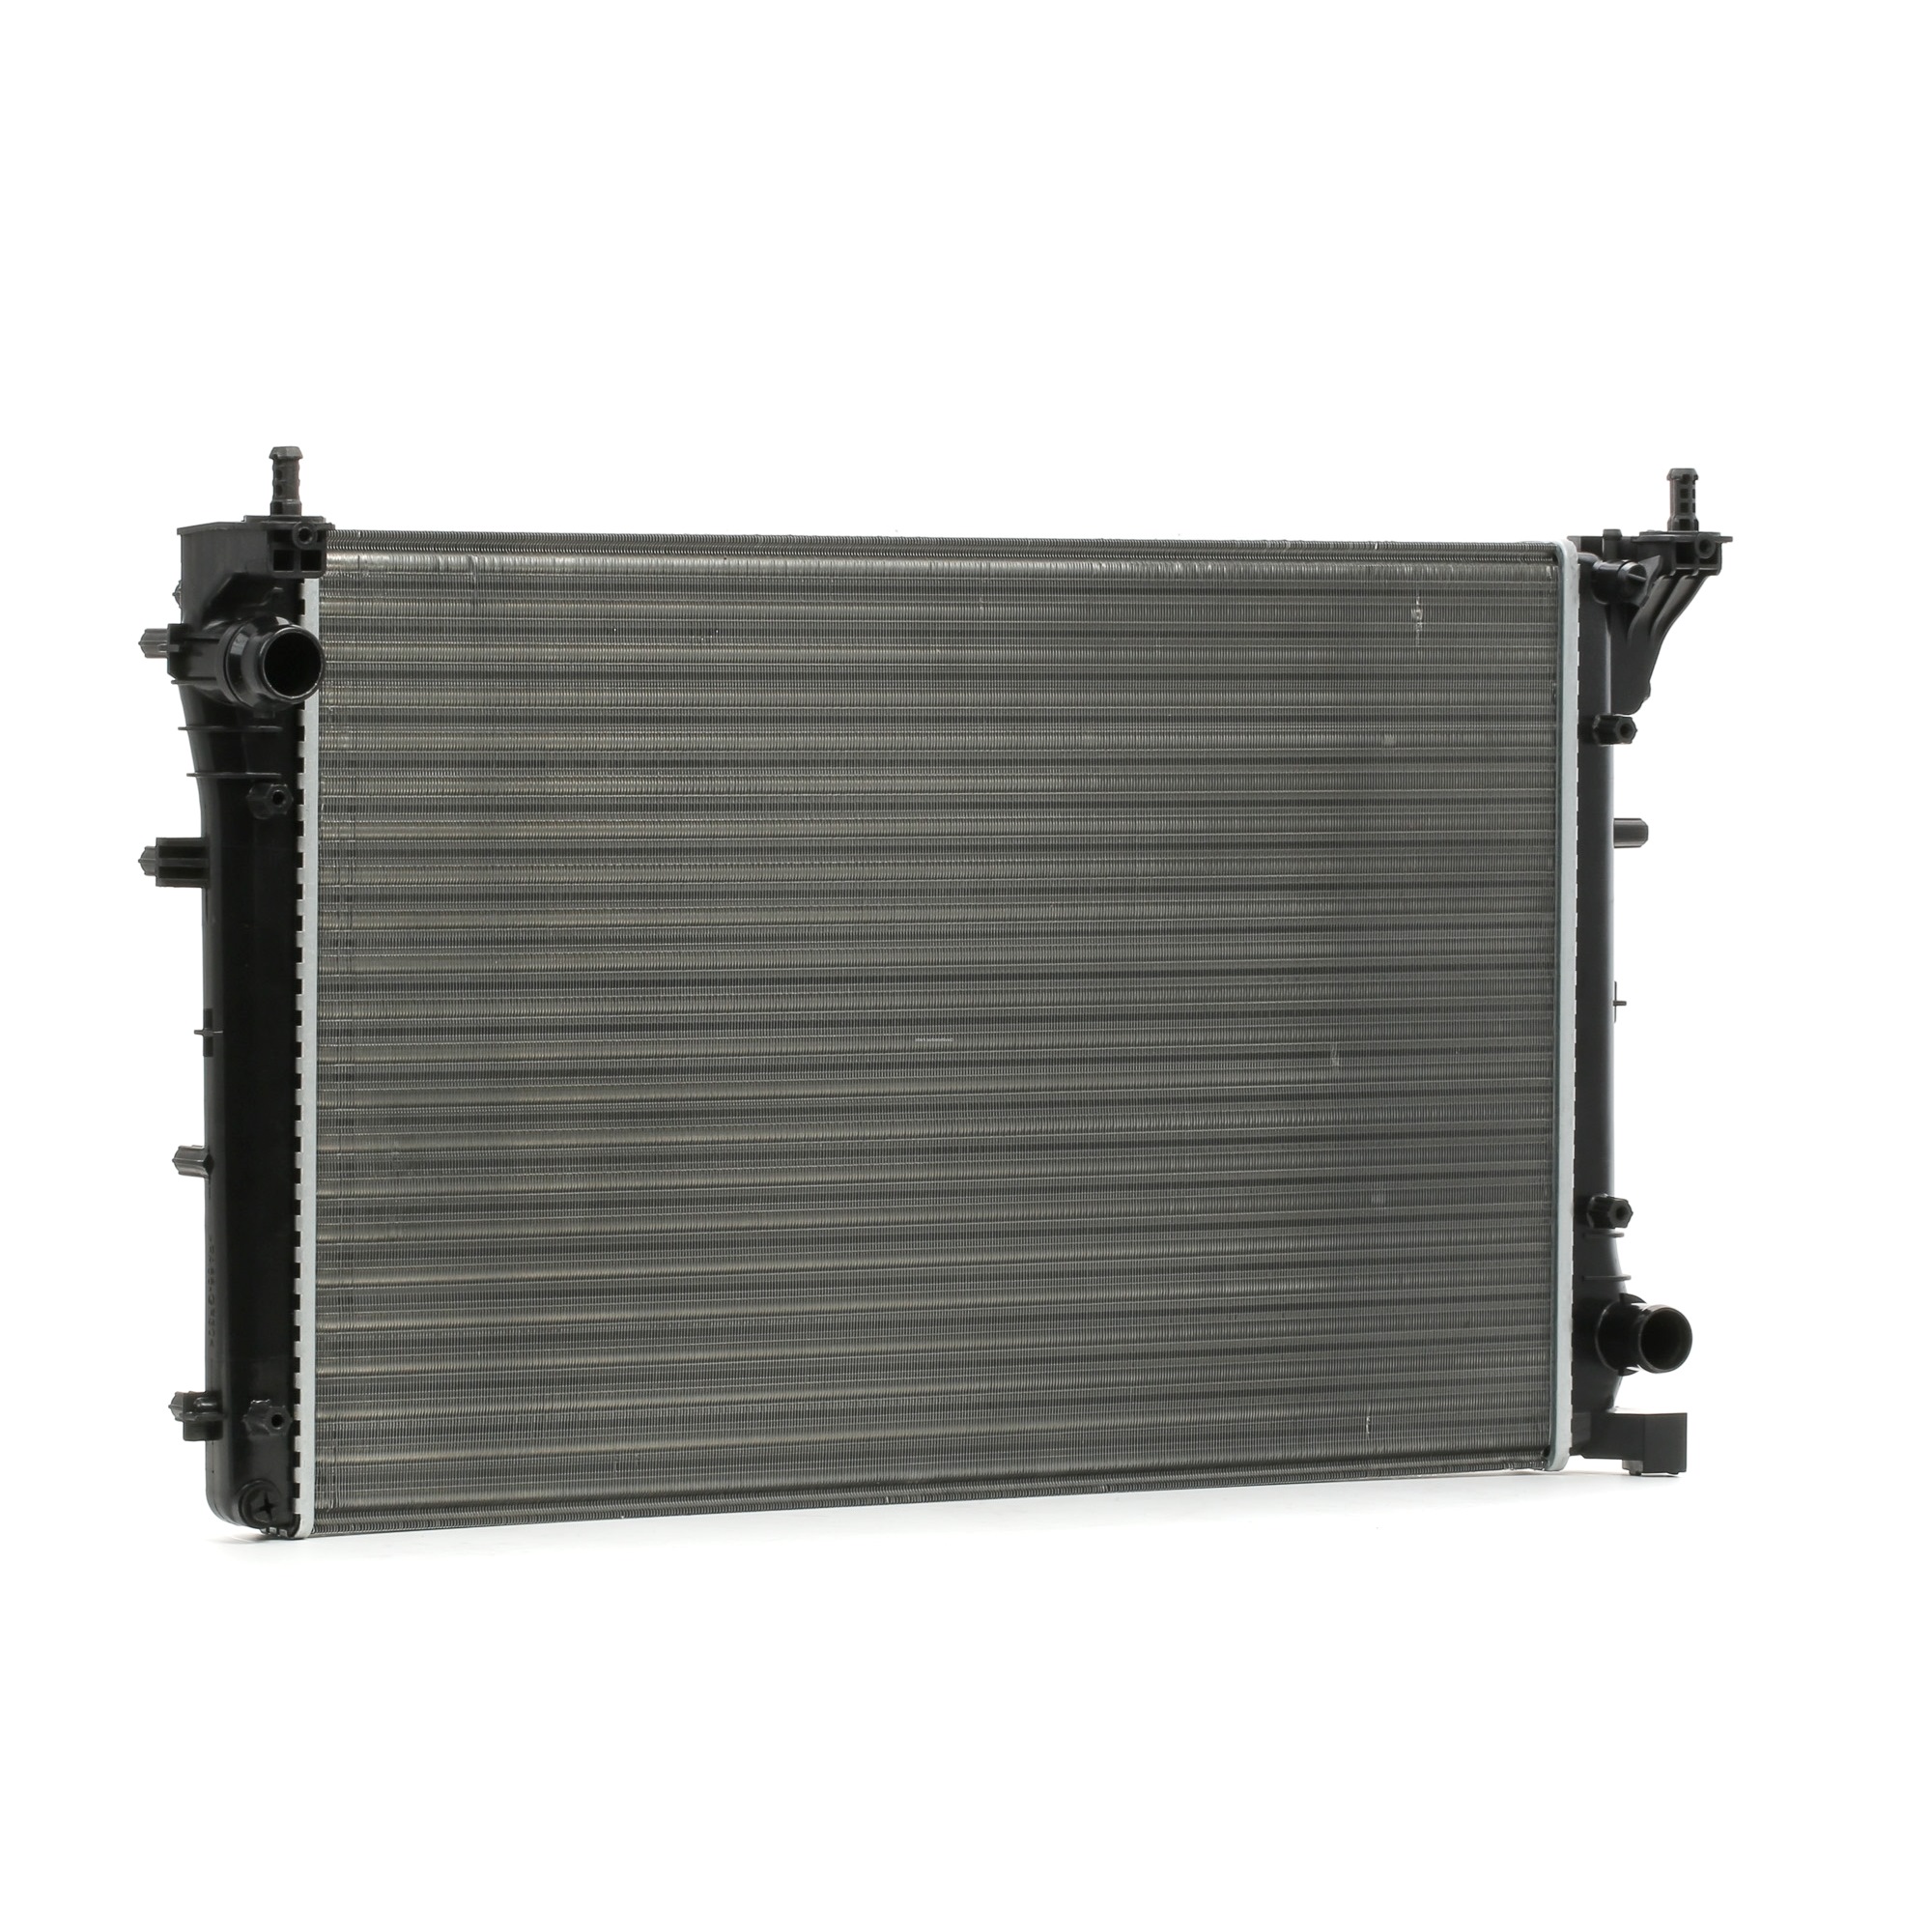 STARK SKRD-0120814 Engine radiator Aluminium, for vehicles with/without air conditioning, Manual Transmission, Brazed cooling fins